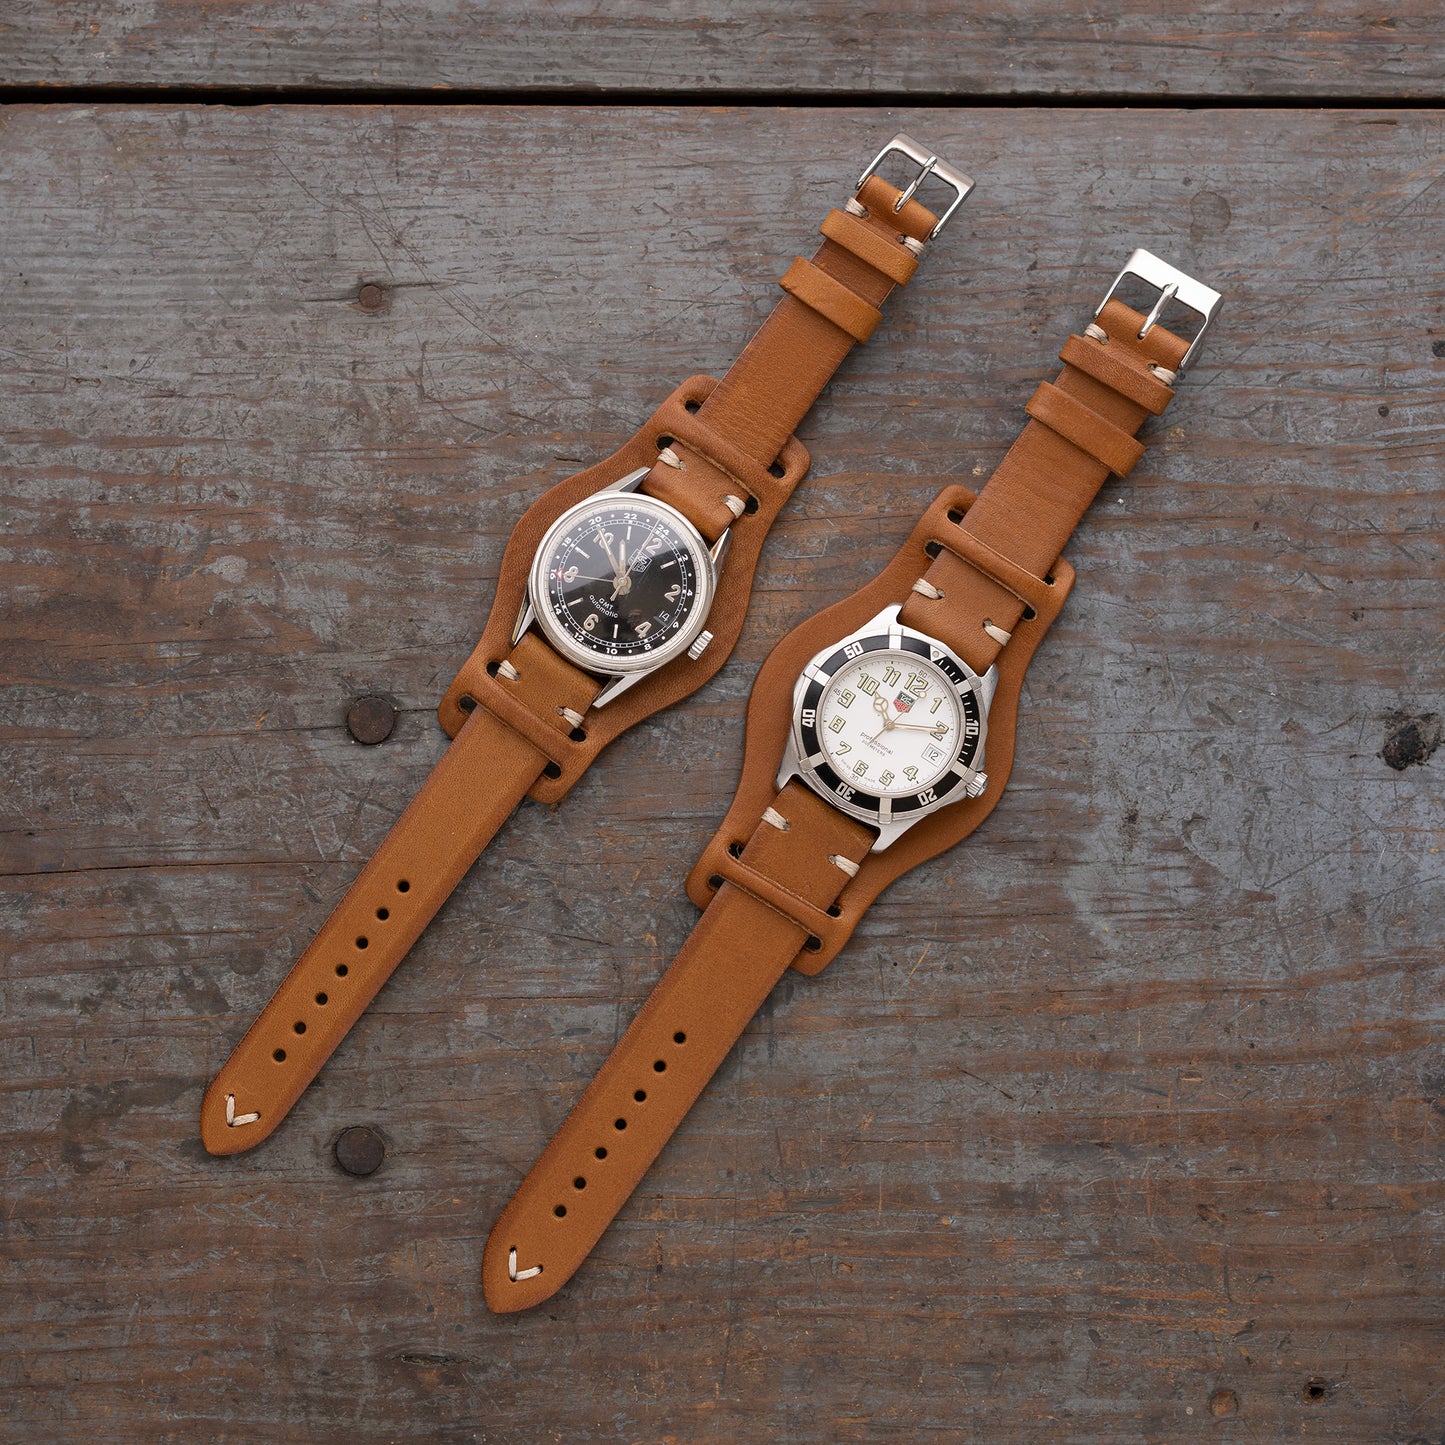 Jackson Wayne vintage leather watch strap with bund pad made of Italian vegetable tanned leather in saddle tan color